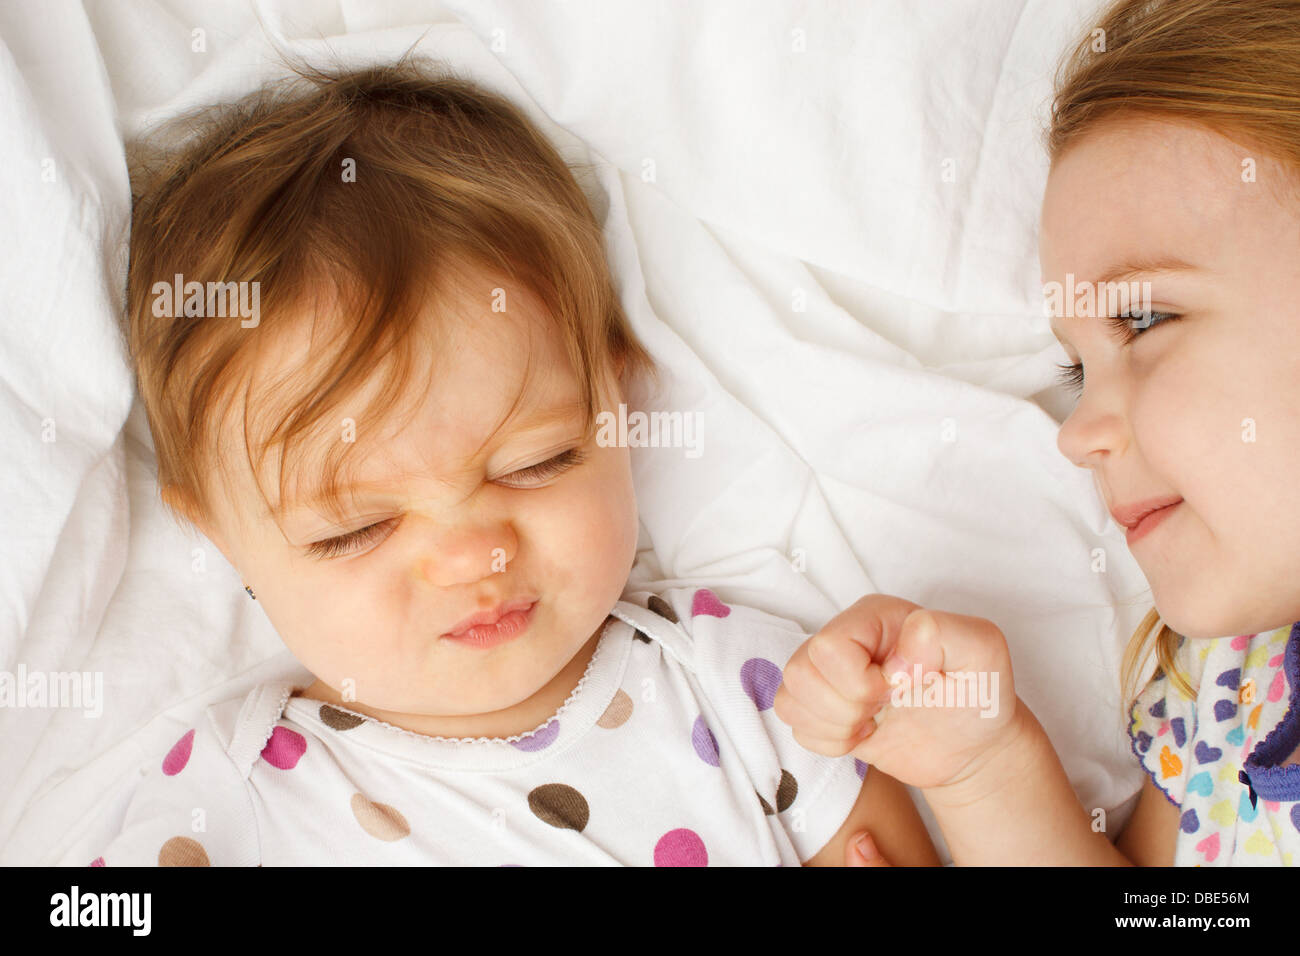 Silly baby in sheets with big sister Stock Photo